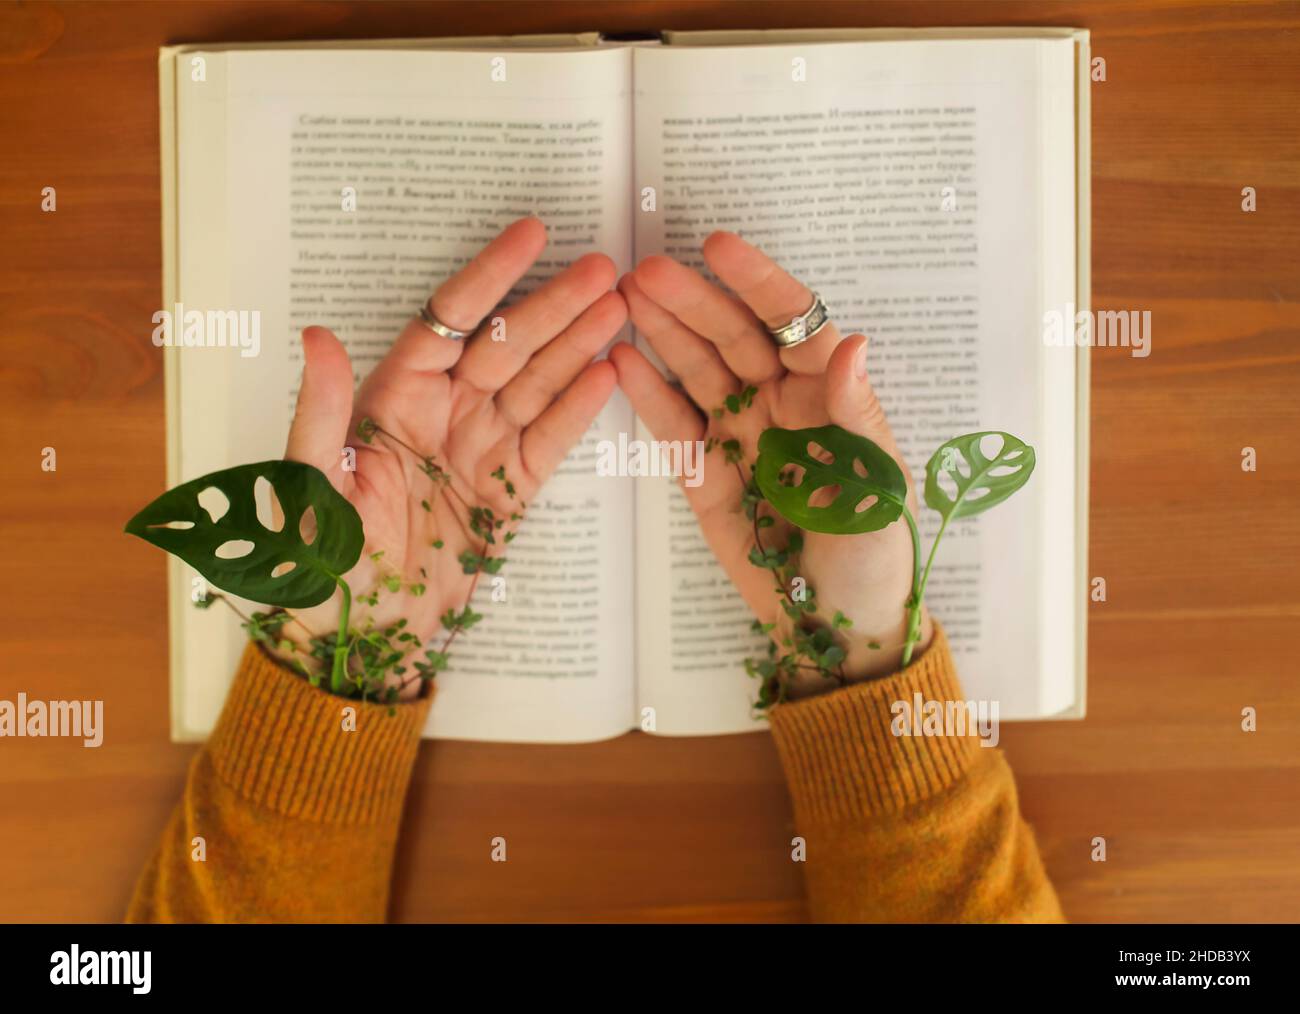 Green leaves wrapped around female hands lying on open book. Cropped shot of woman sitting with open palms at table with plant growing from under swea Stock Photo